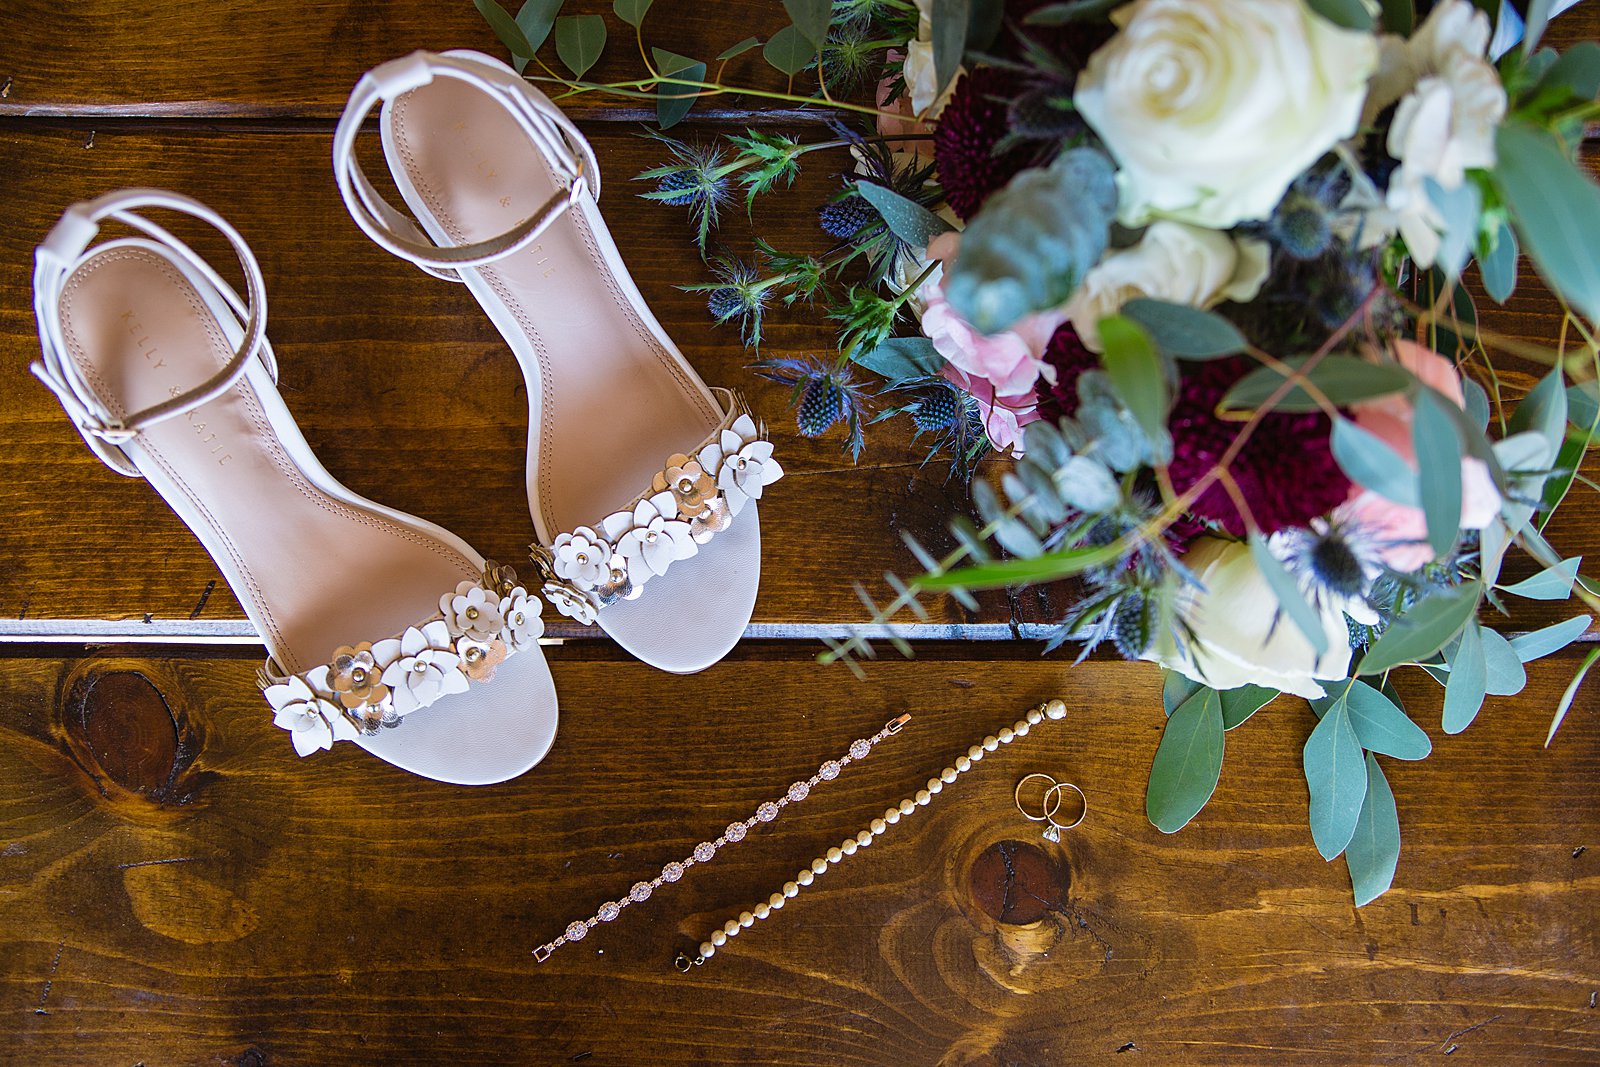 Brides's wedding day details of floral shoes, romantic bouquet, and jewelry by PMA Photography.